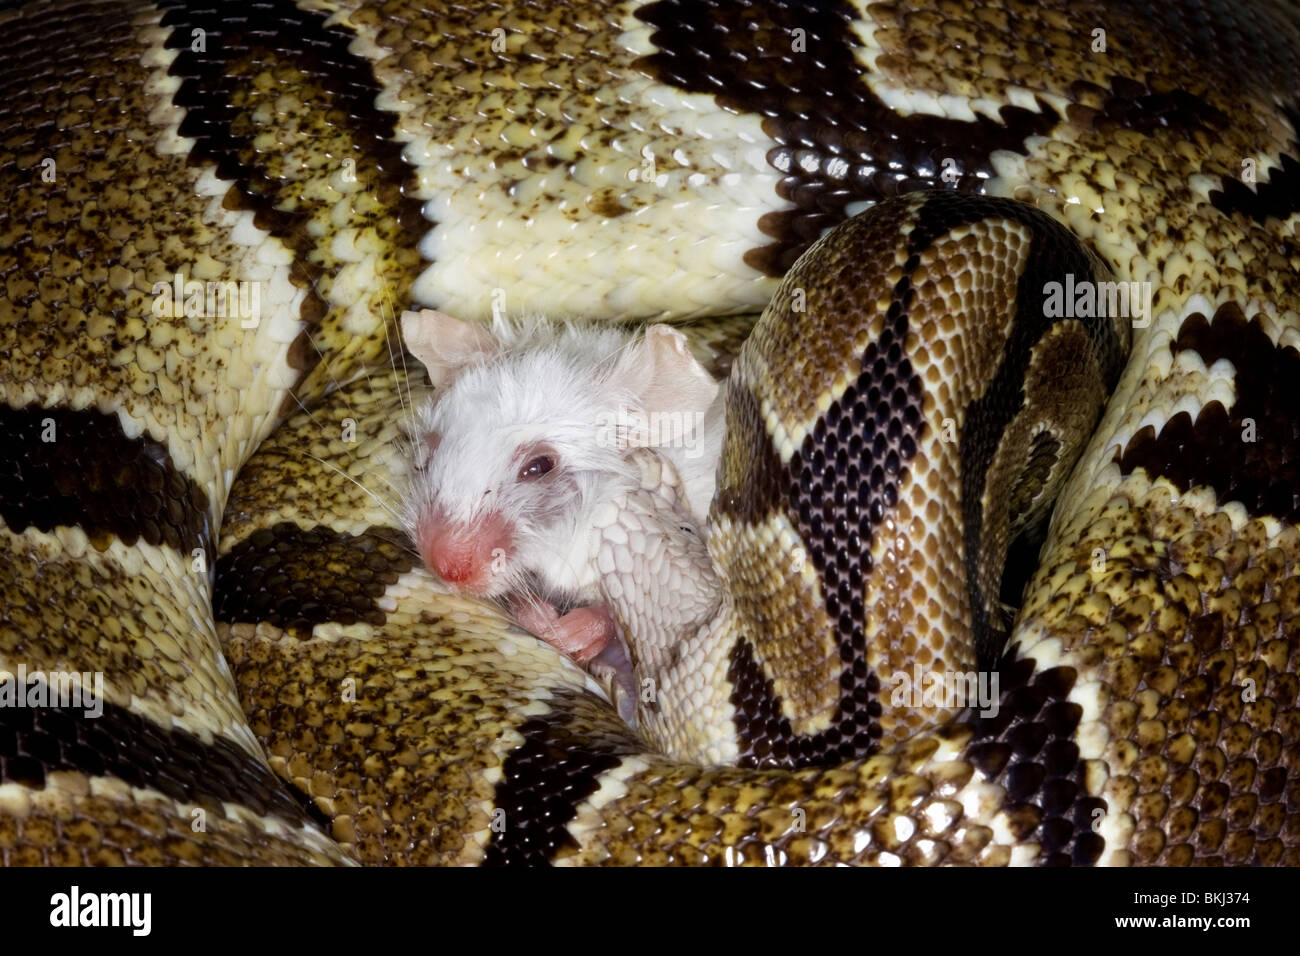 A Ball or Royal python snake crushing the bones of a white mouse before eating it Stock Photo